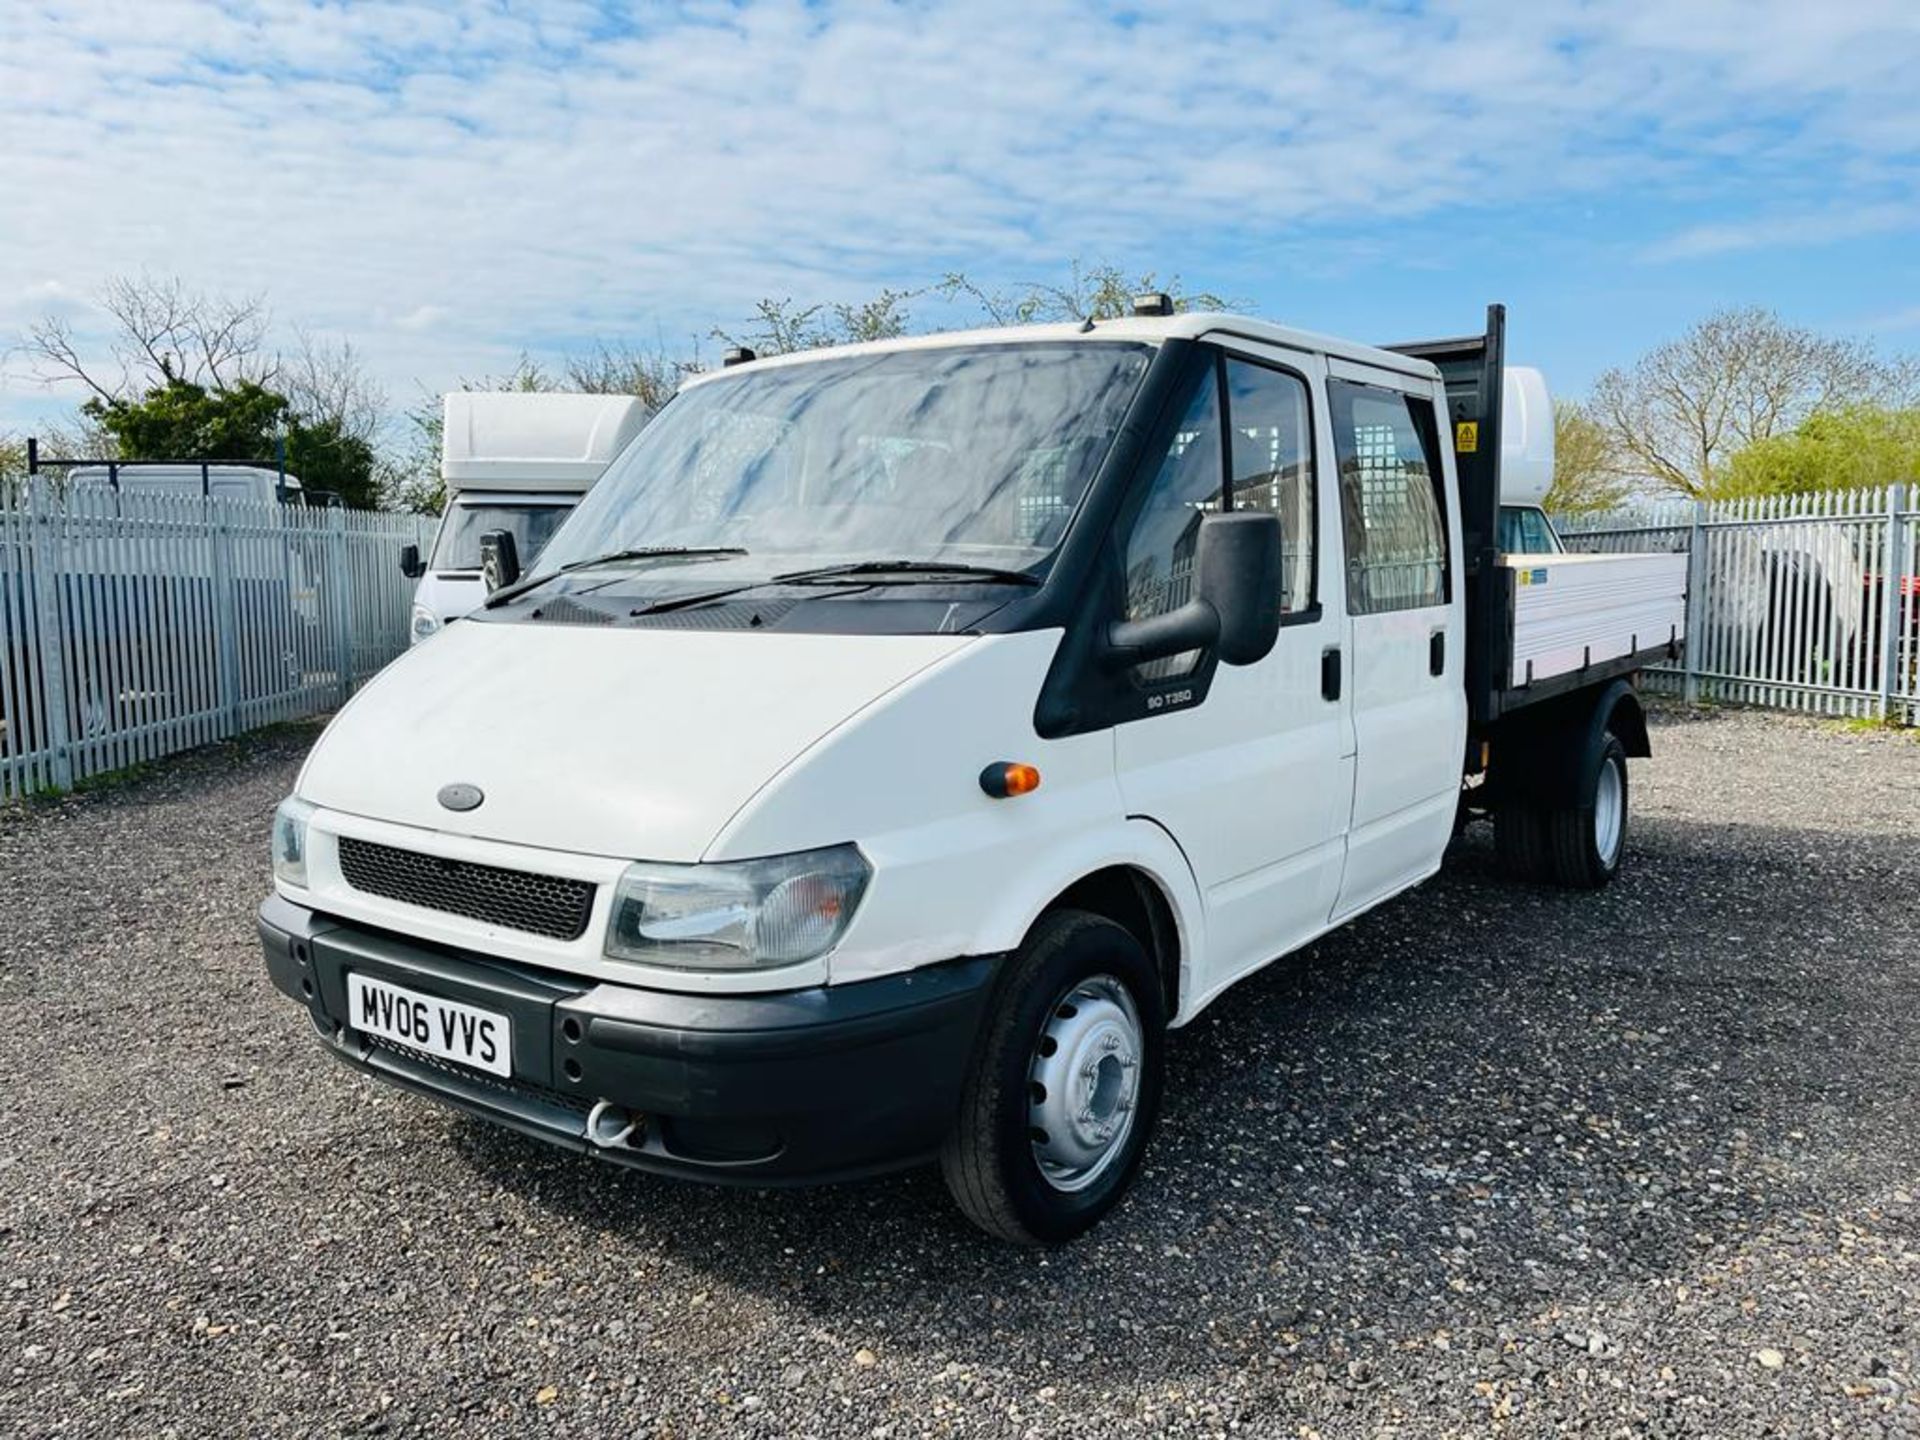 ** ON SALE ** Ford Transit 2.4 TD 350 Tipper Crew Cab 2006 '06 Reg' - Twin Rear Axle - NO VAT - Image 3 of 23